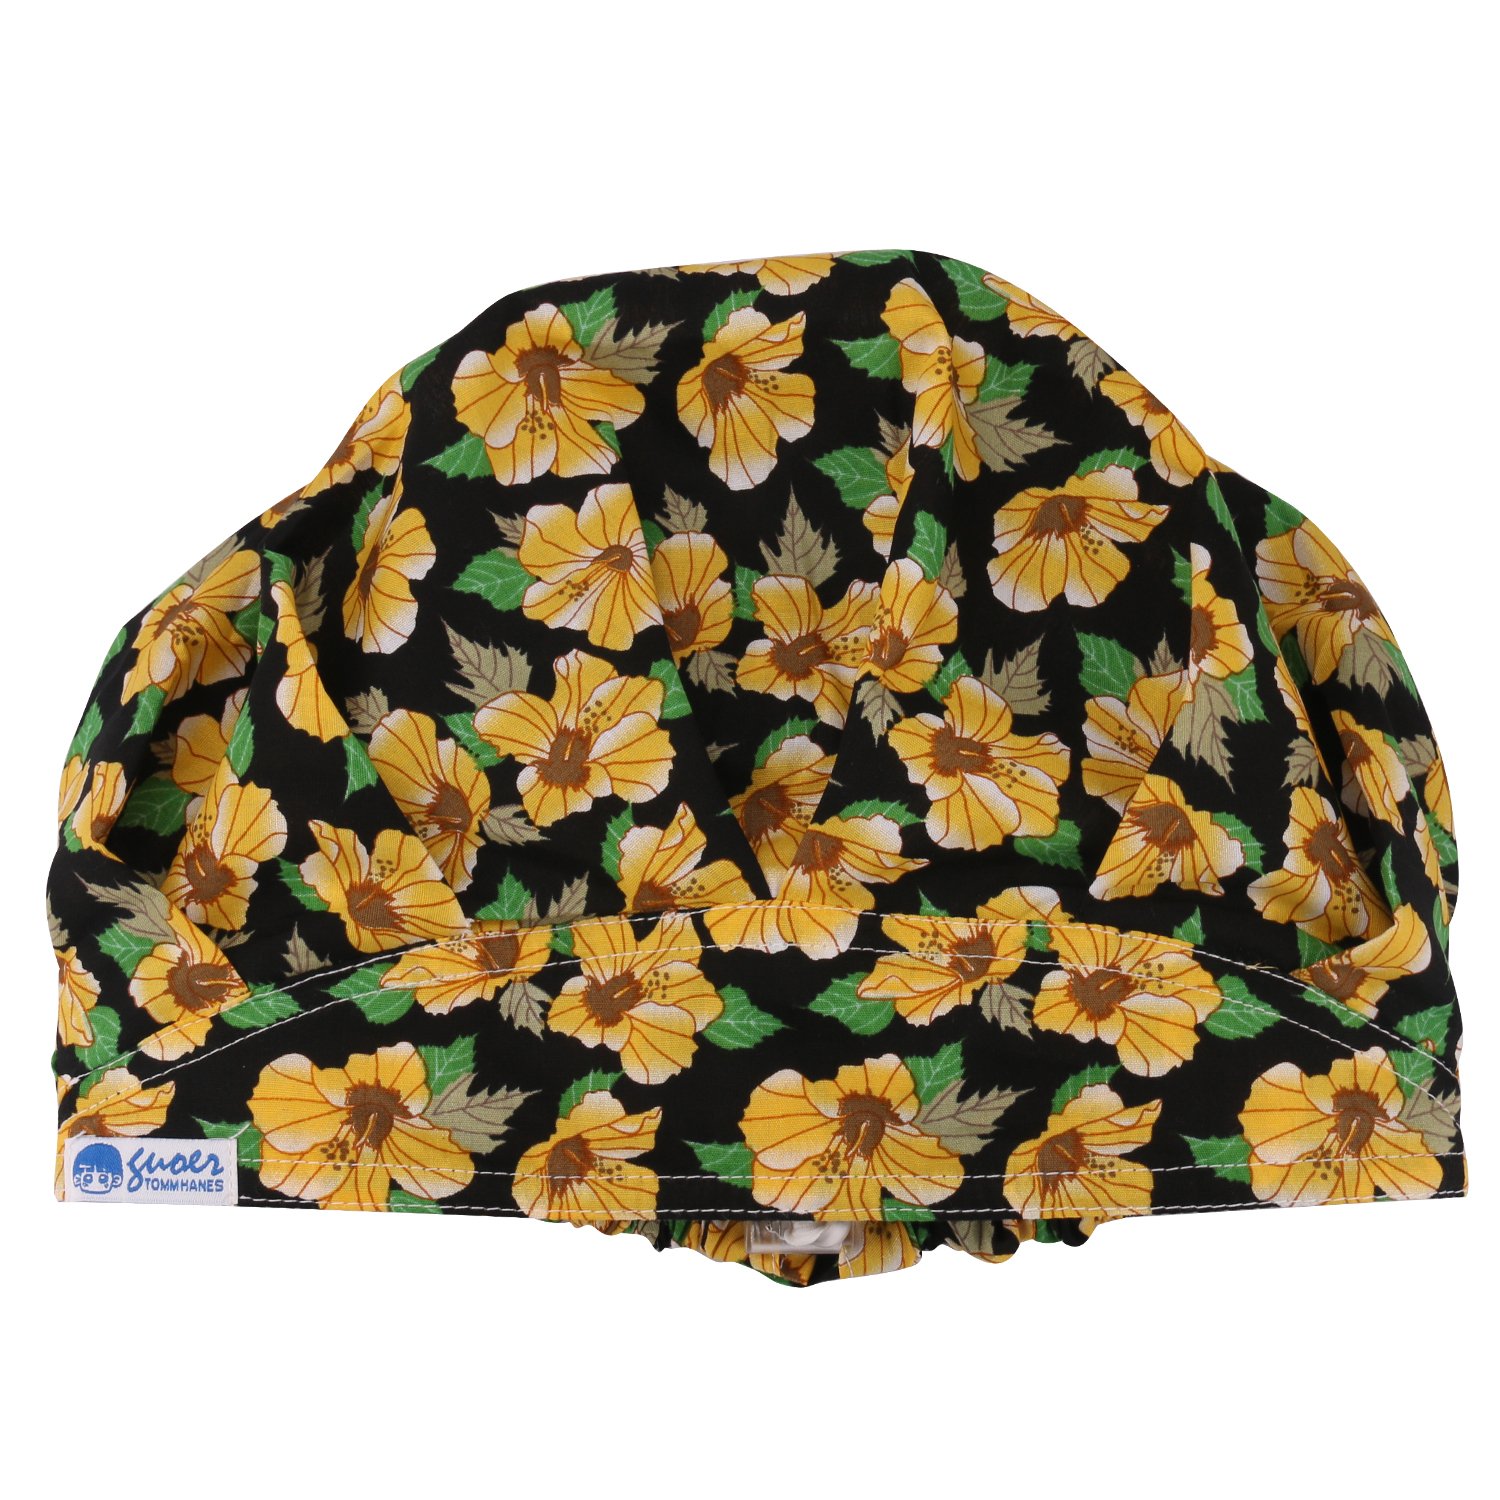 Guoer 100% cotton medical cap in a variety of sizes and colors